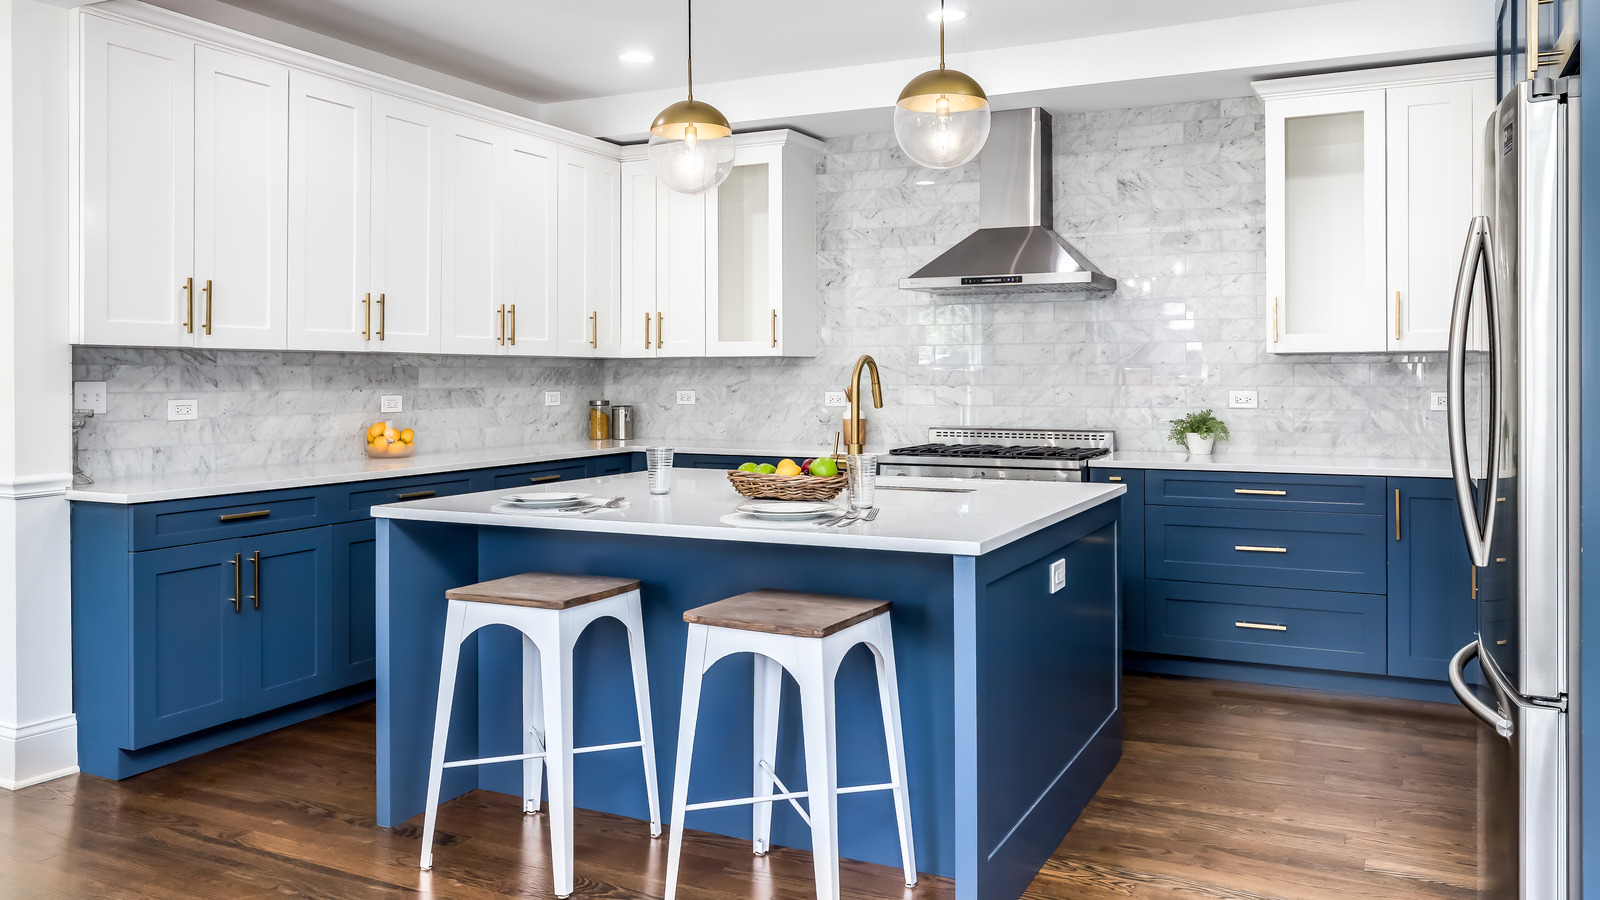 20 Blue Kitchen Ideas You'll Absolutely Love